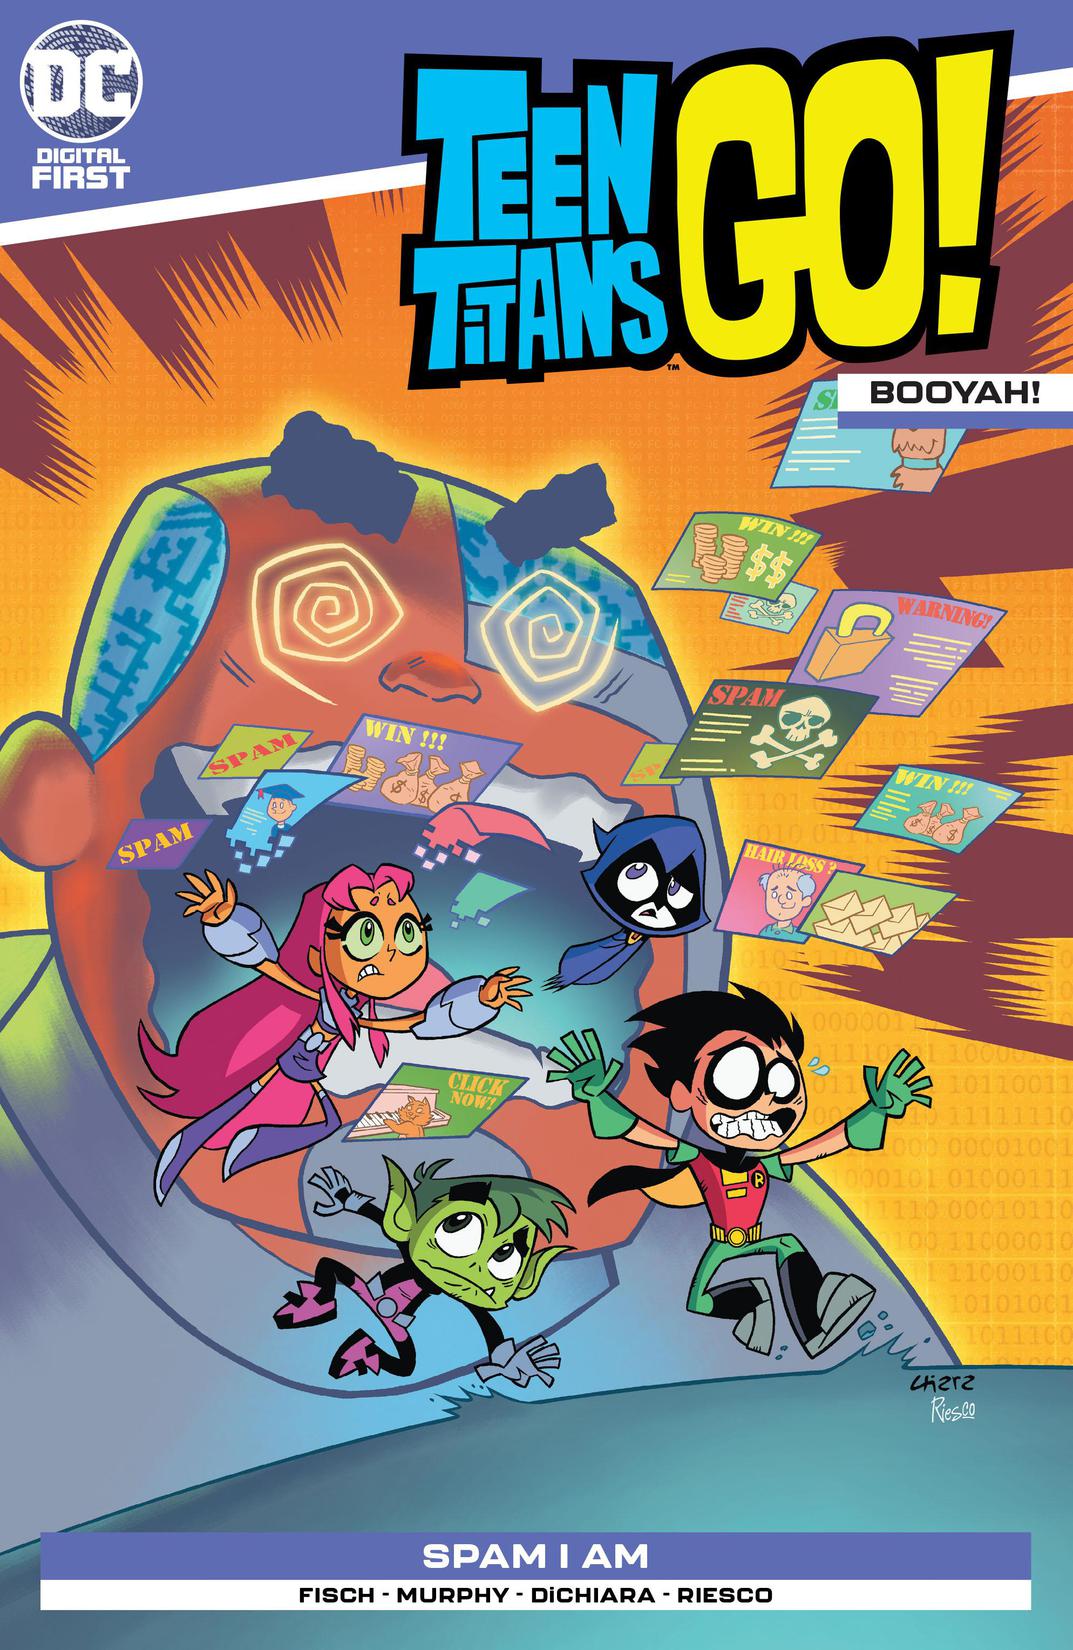 Teen Titans Go!: Booyah! #4 preview images